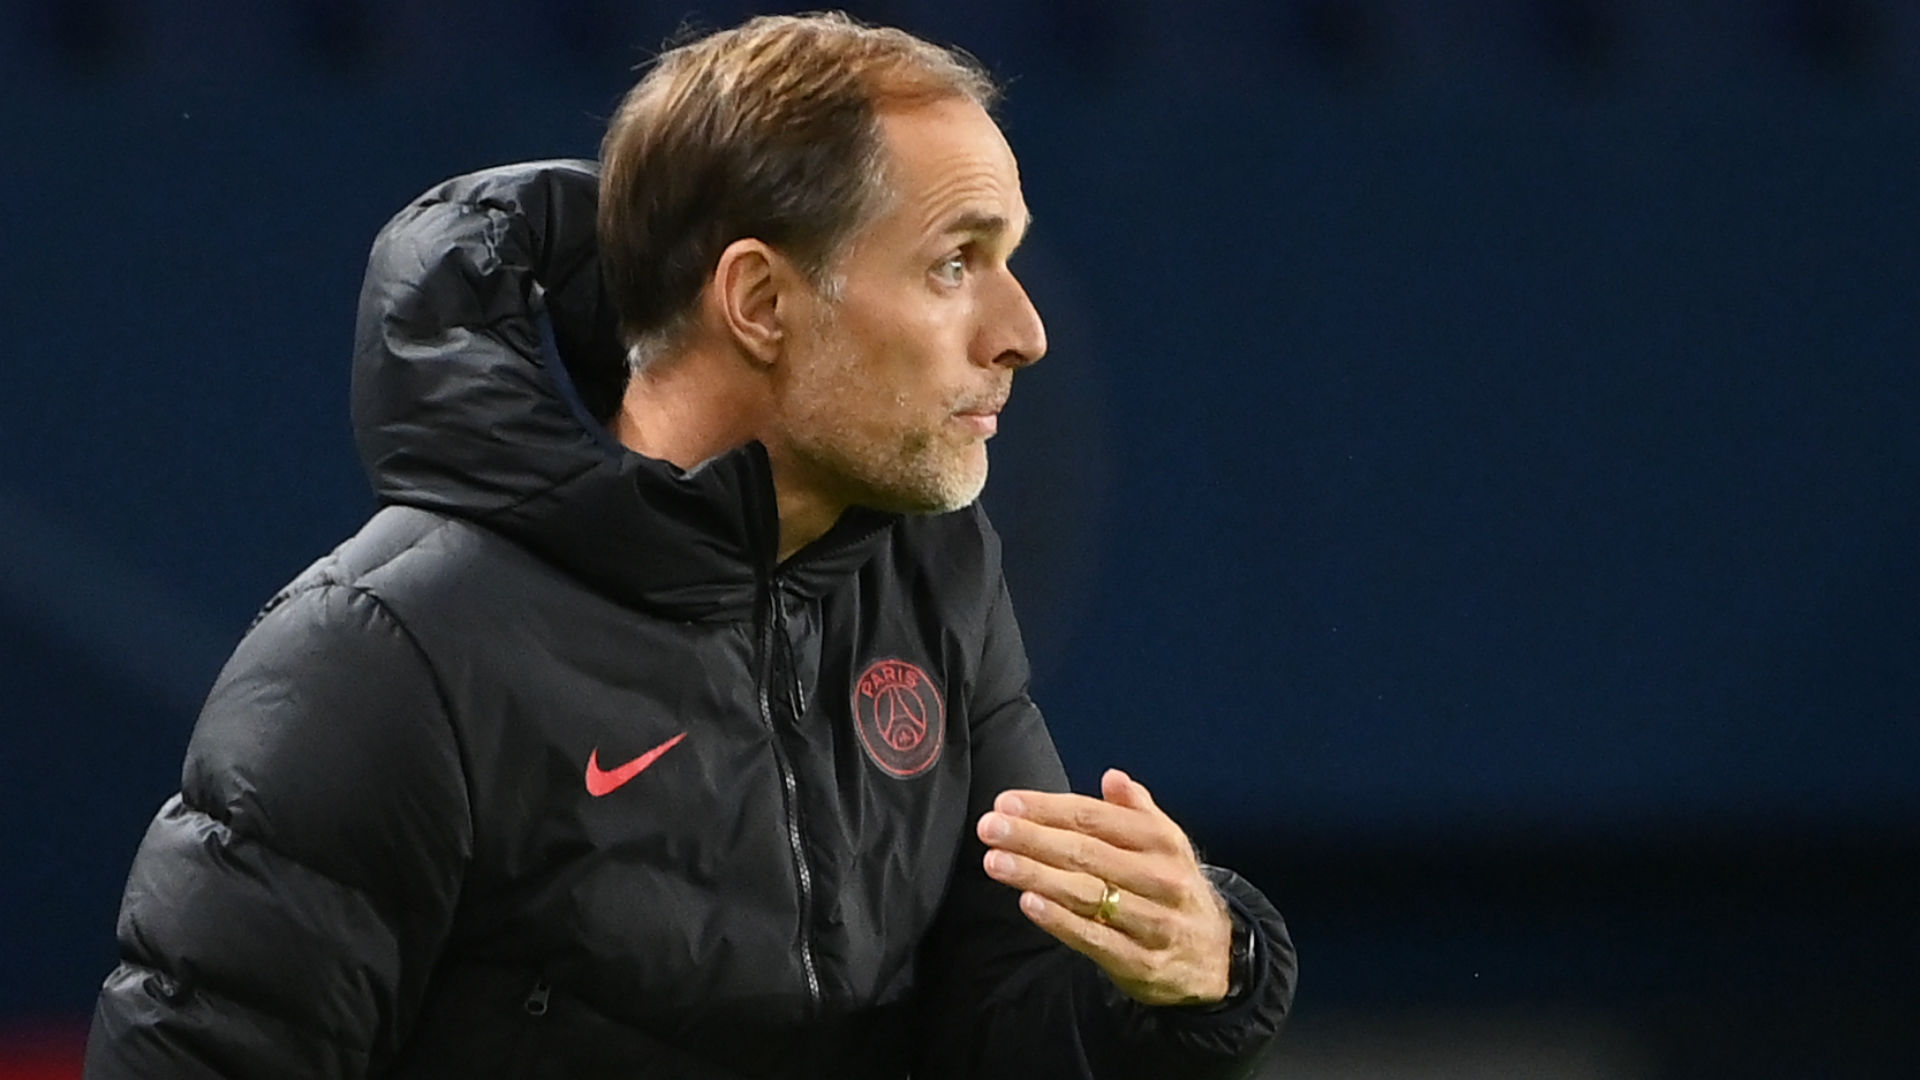 PSG sporting director Leonardo slams Tuchel for transfer demands and says he could be sanctioned